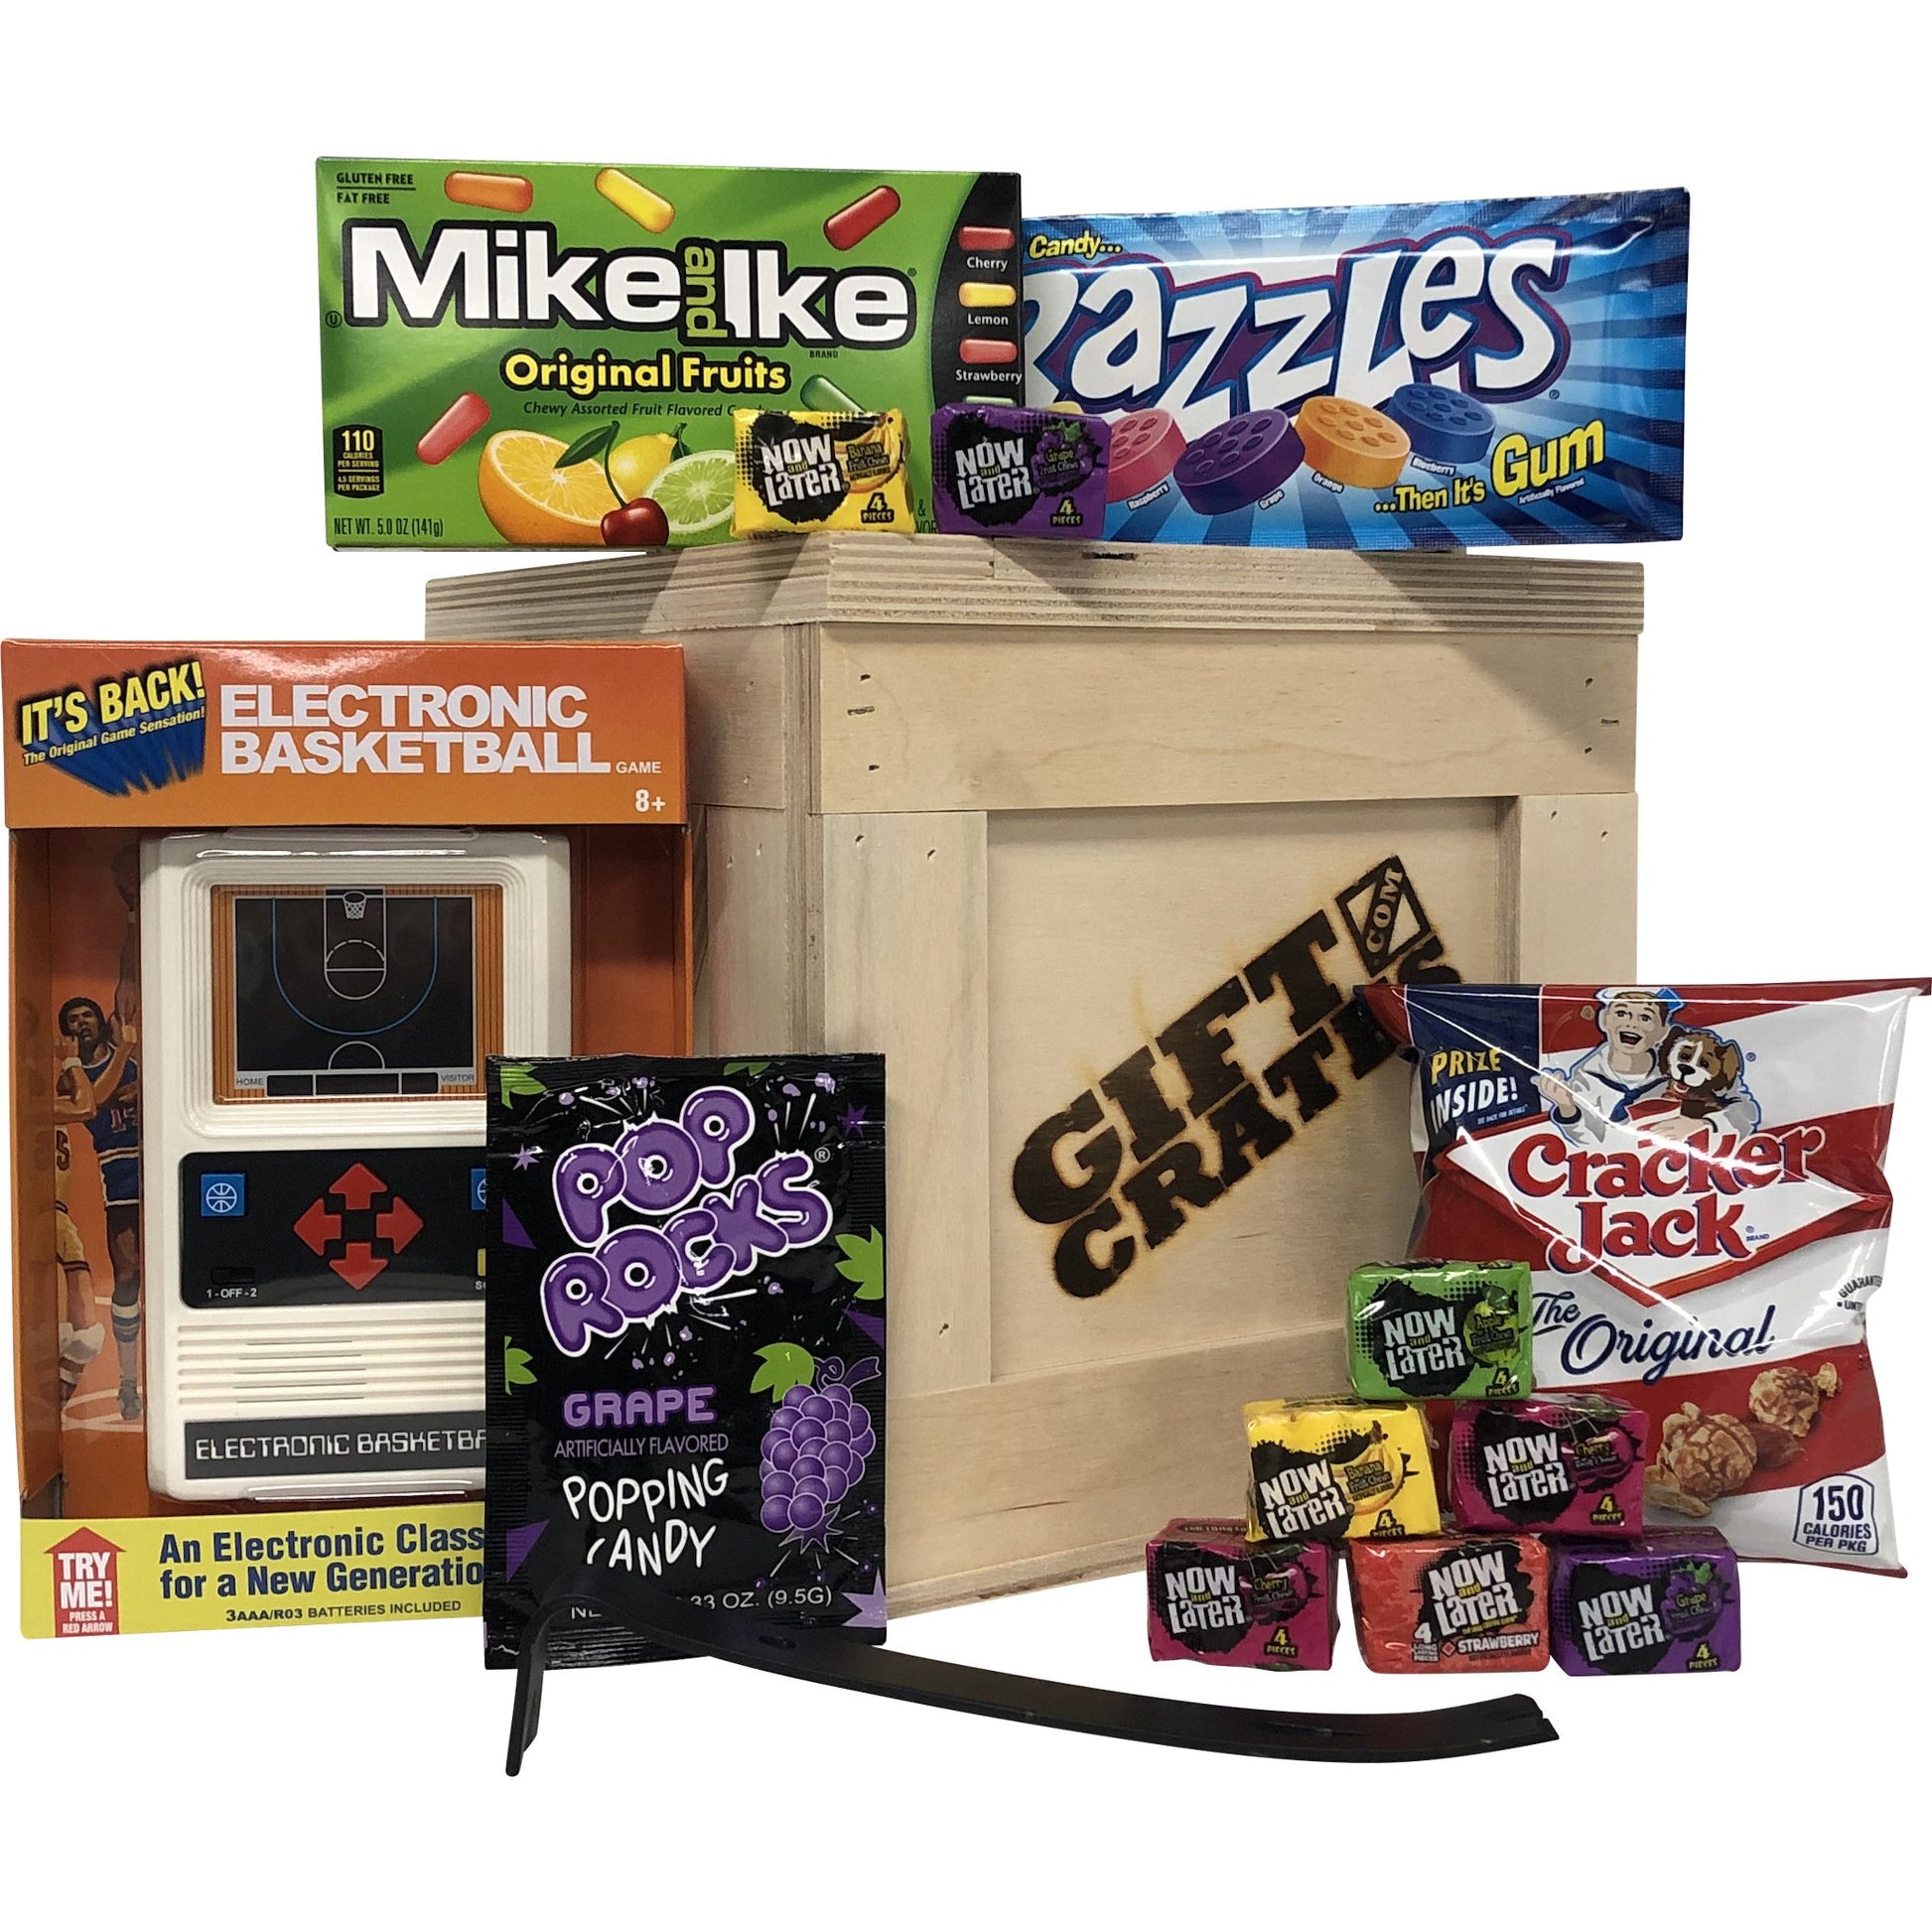 Game "Not Over" Crate - Gift Crates